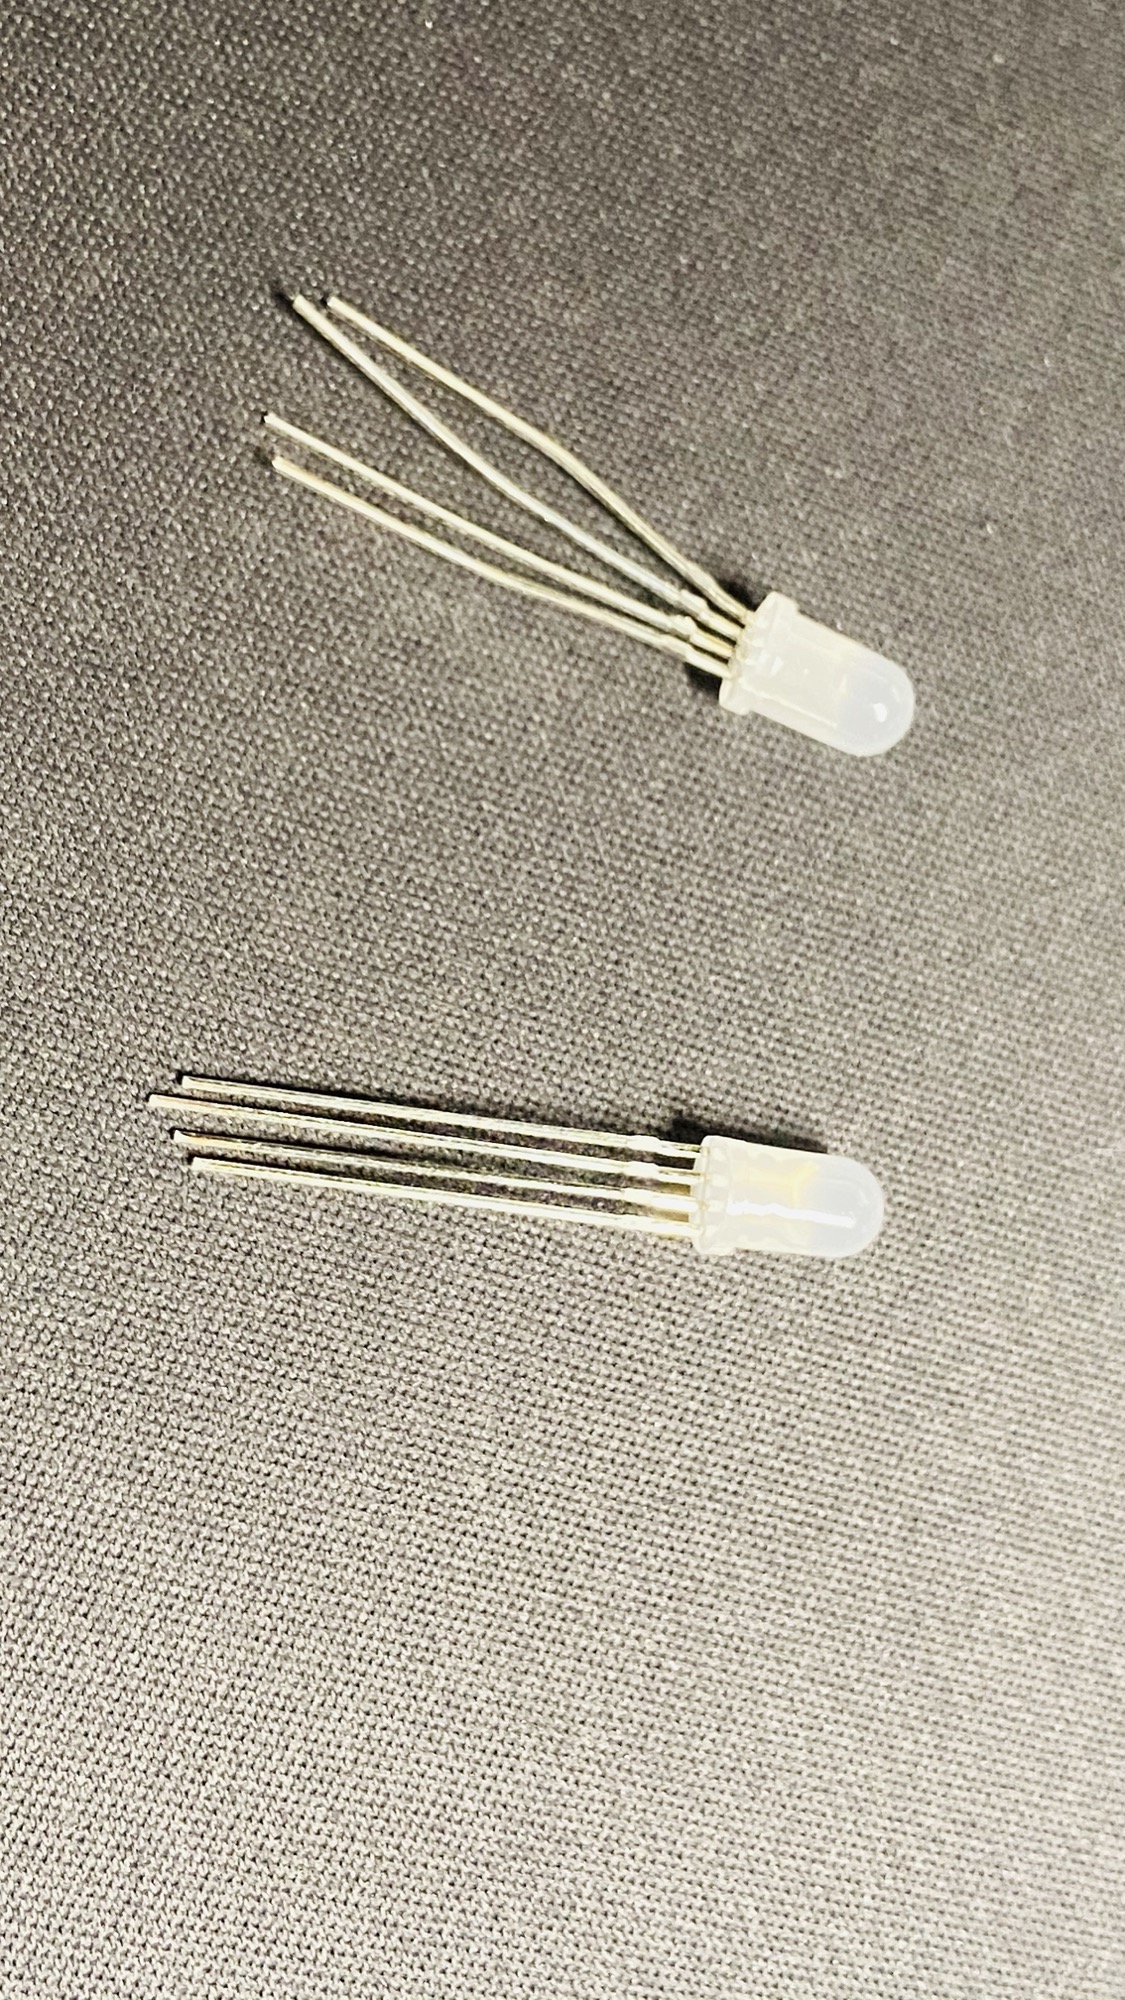 Electronic components: RGB